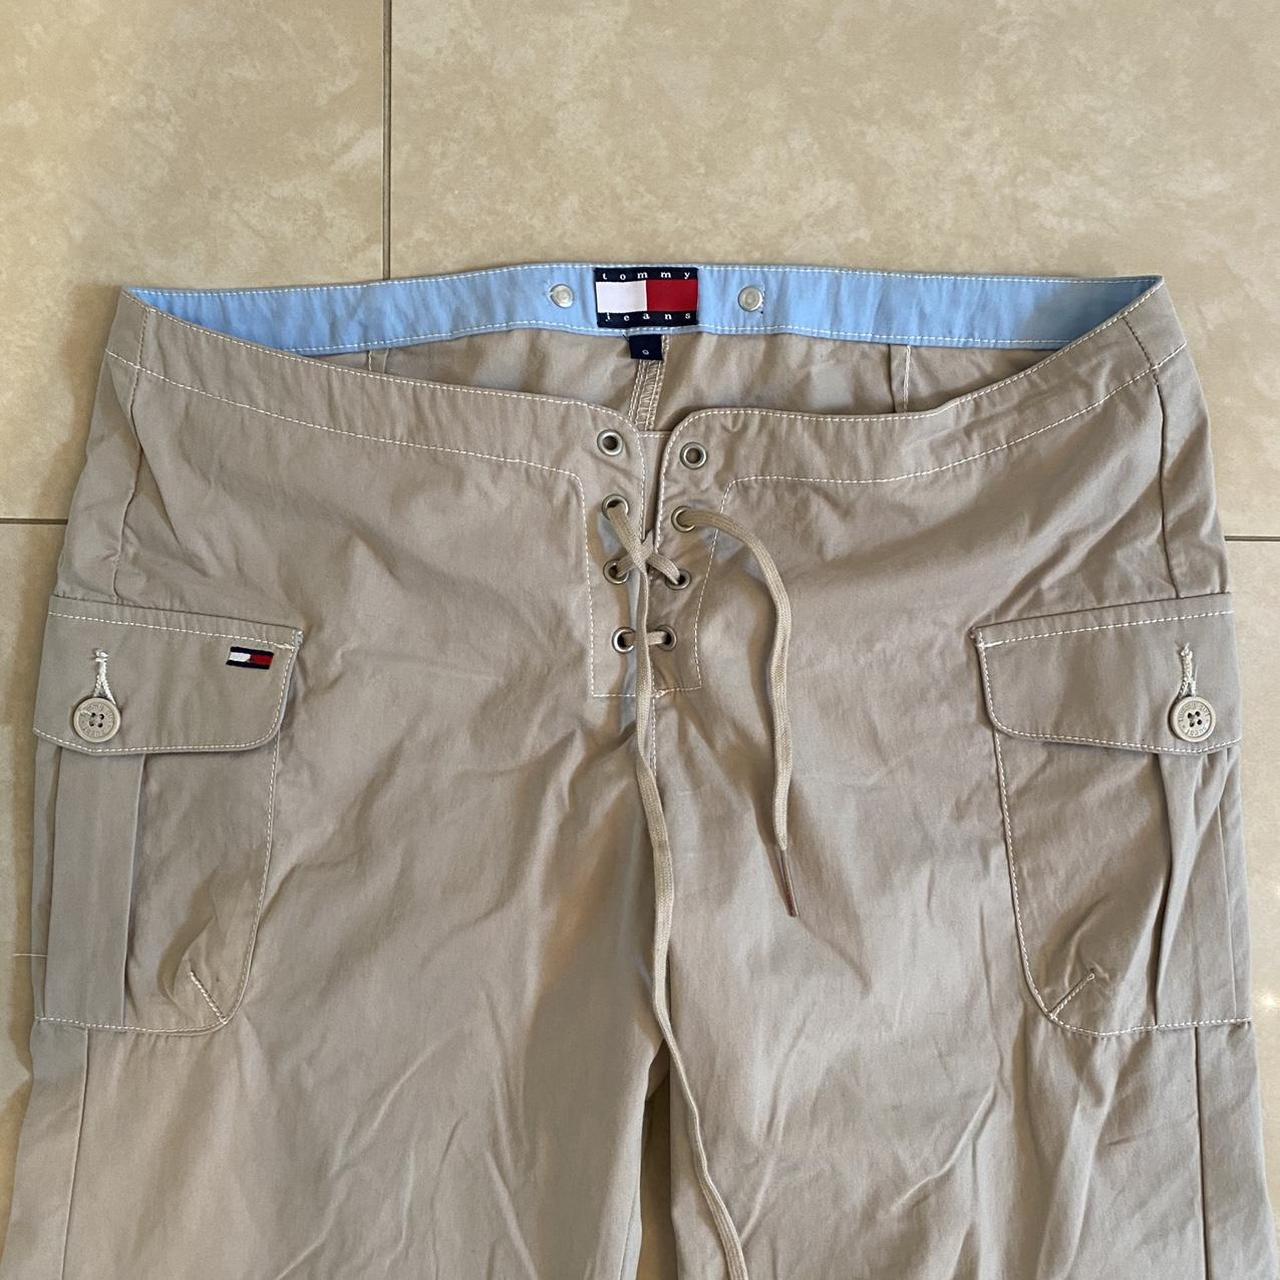 Tommy Hilfiger Women's Tan and Cream Trousers | Depop